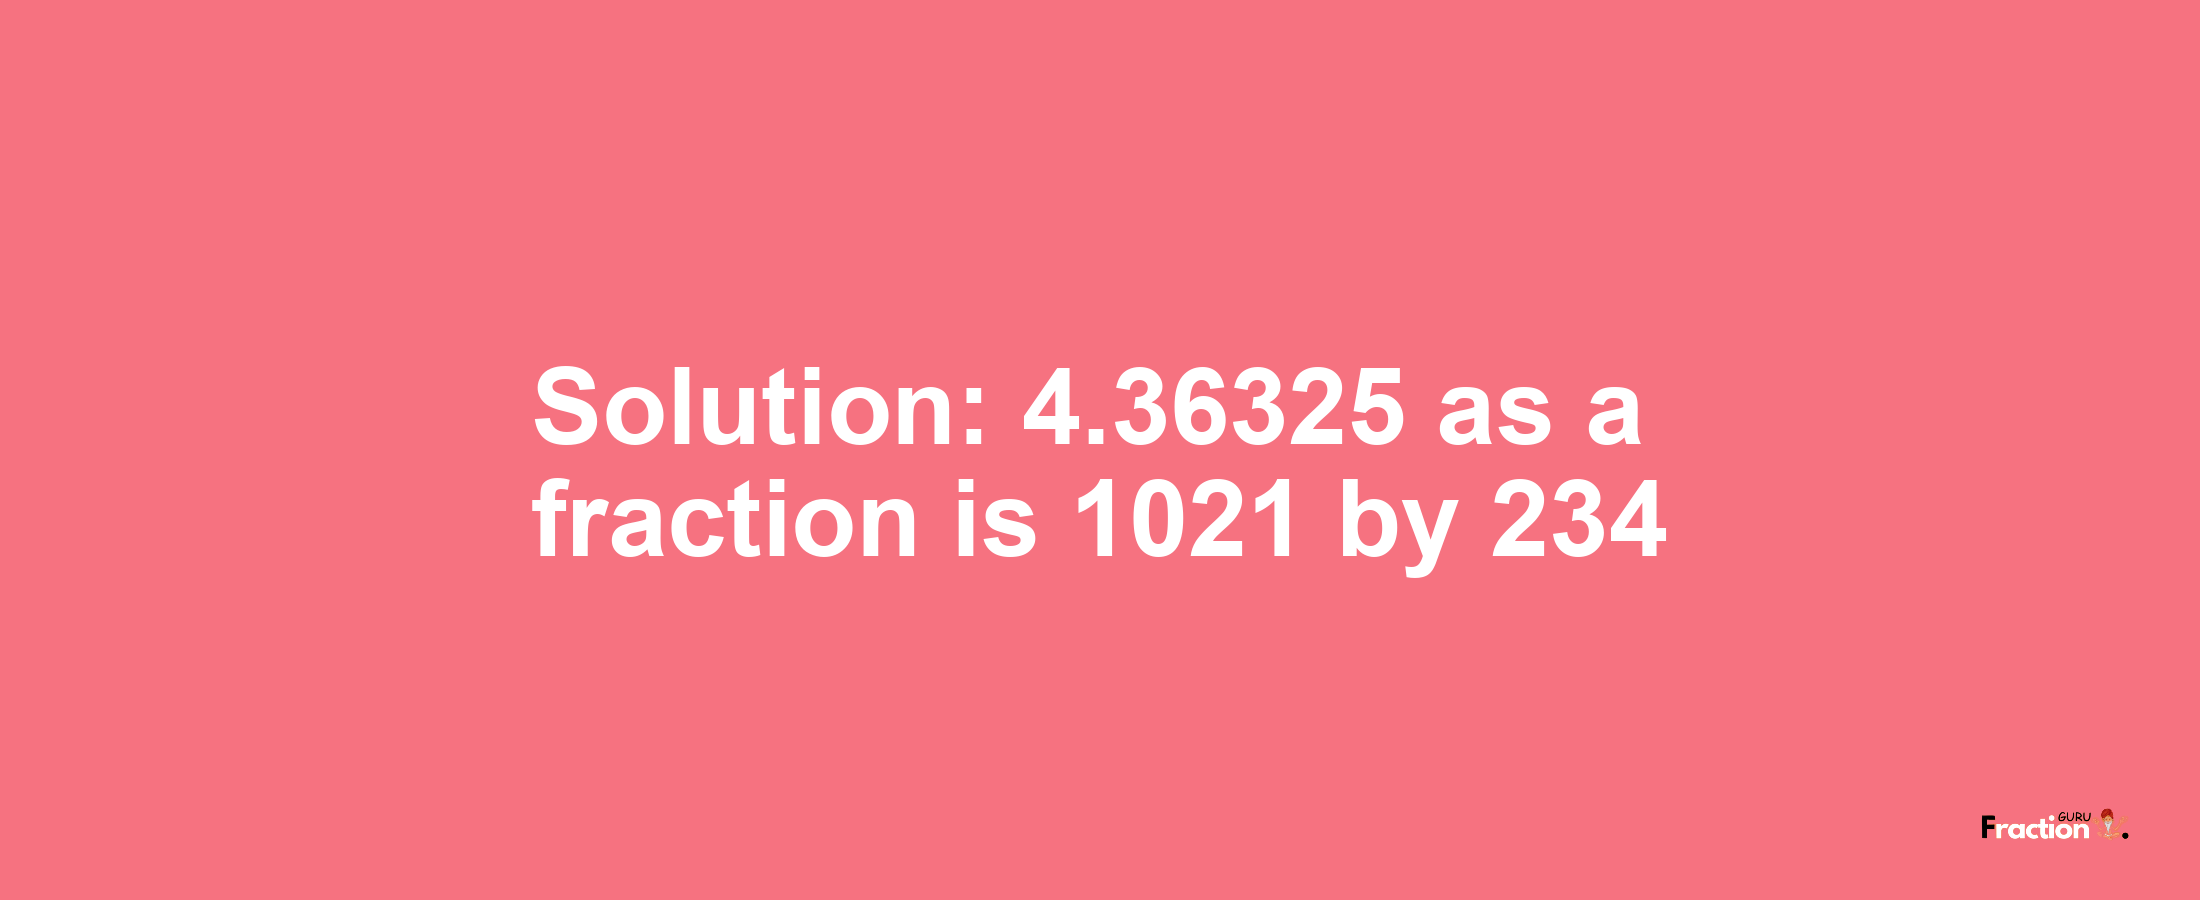 Solution:4.36325 as a fraction is 1021/234